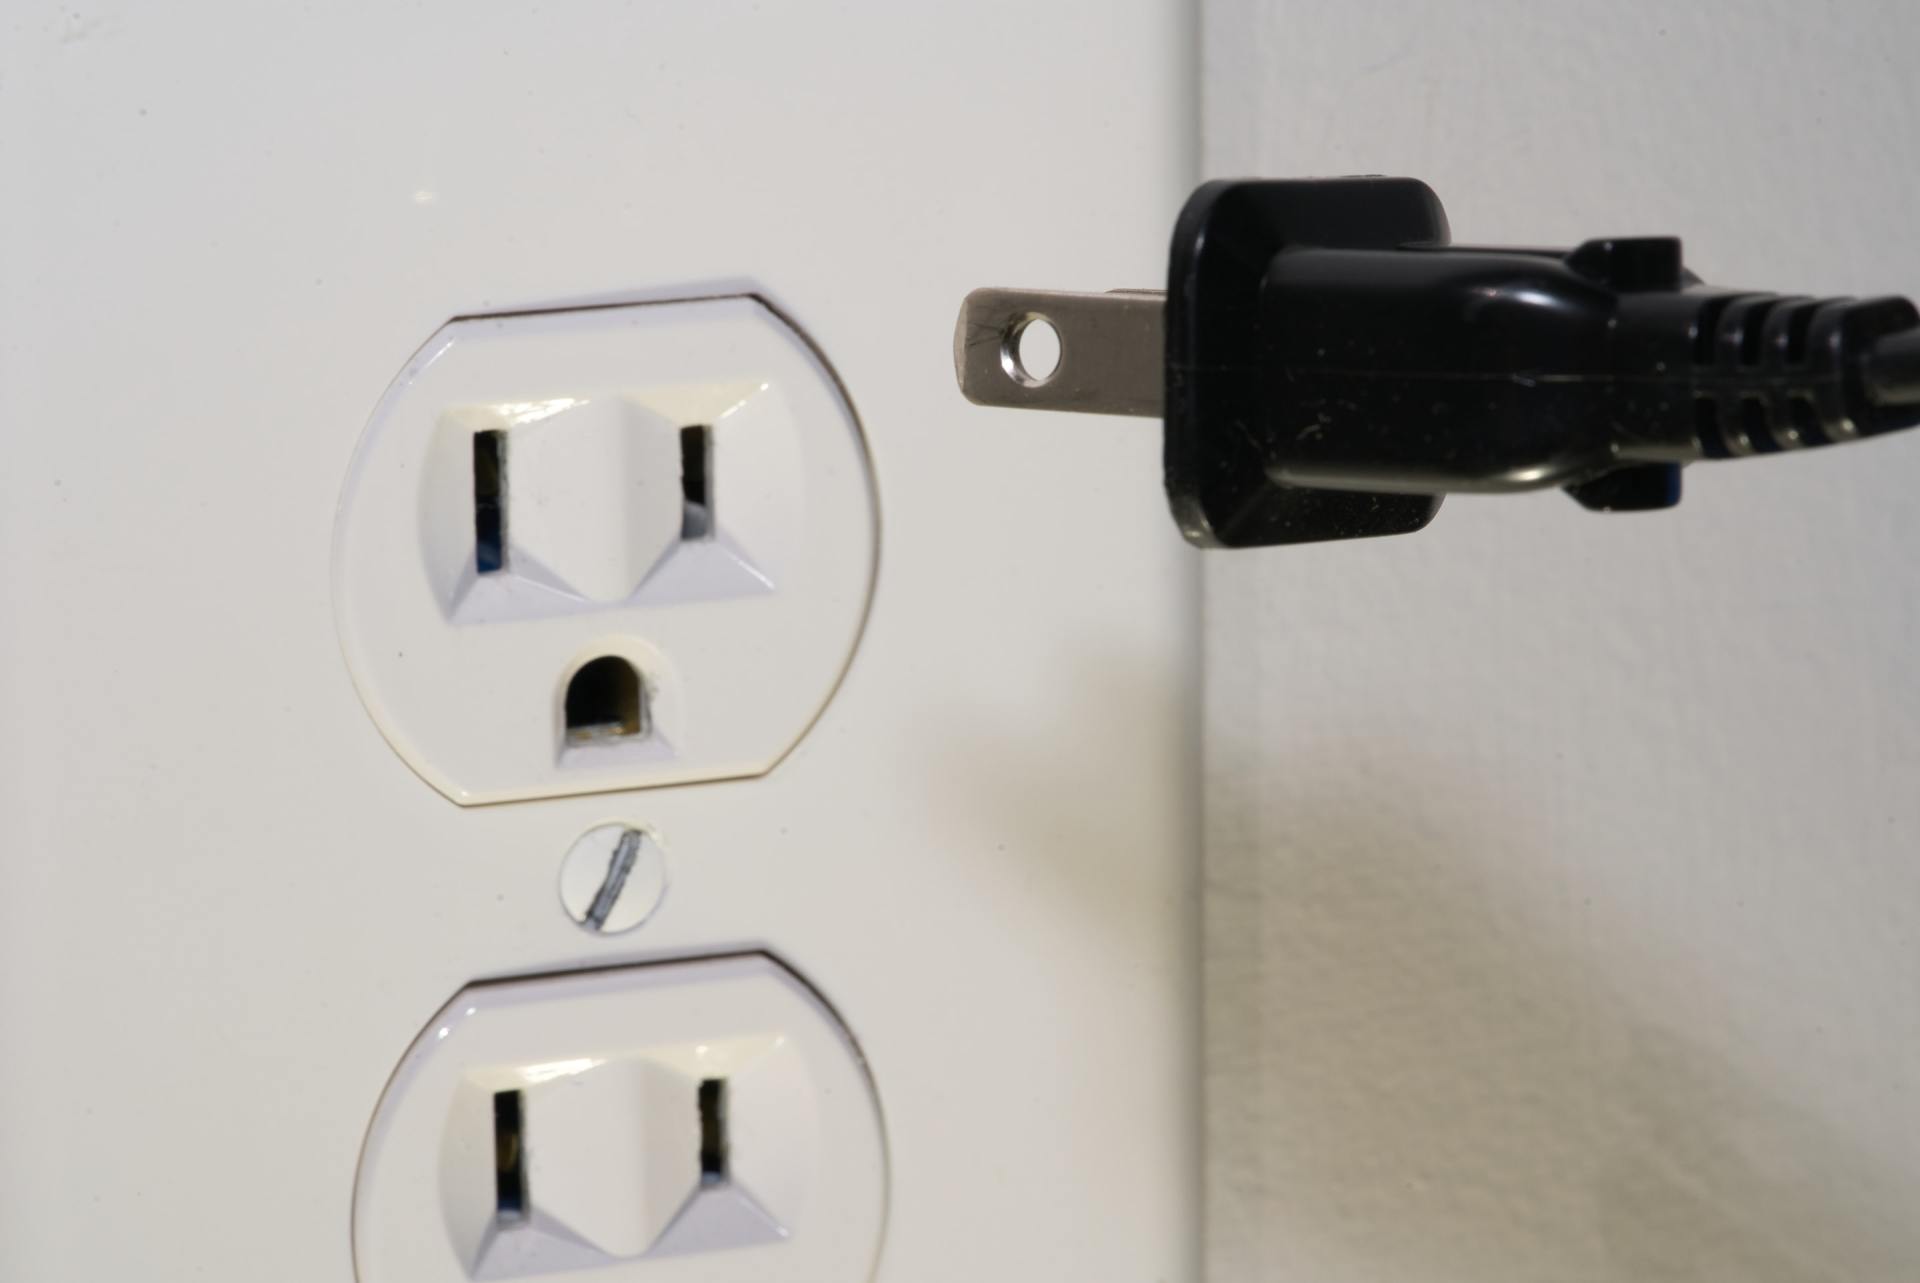 troubleshooting why an outlet doesn't work